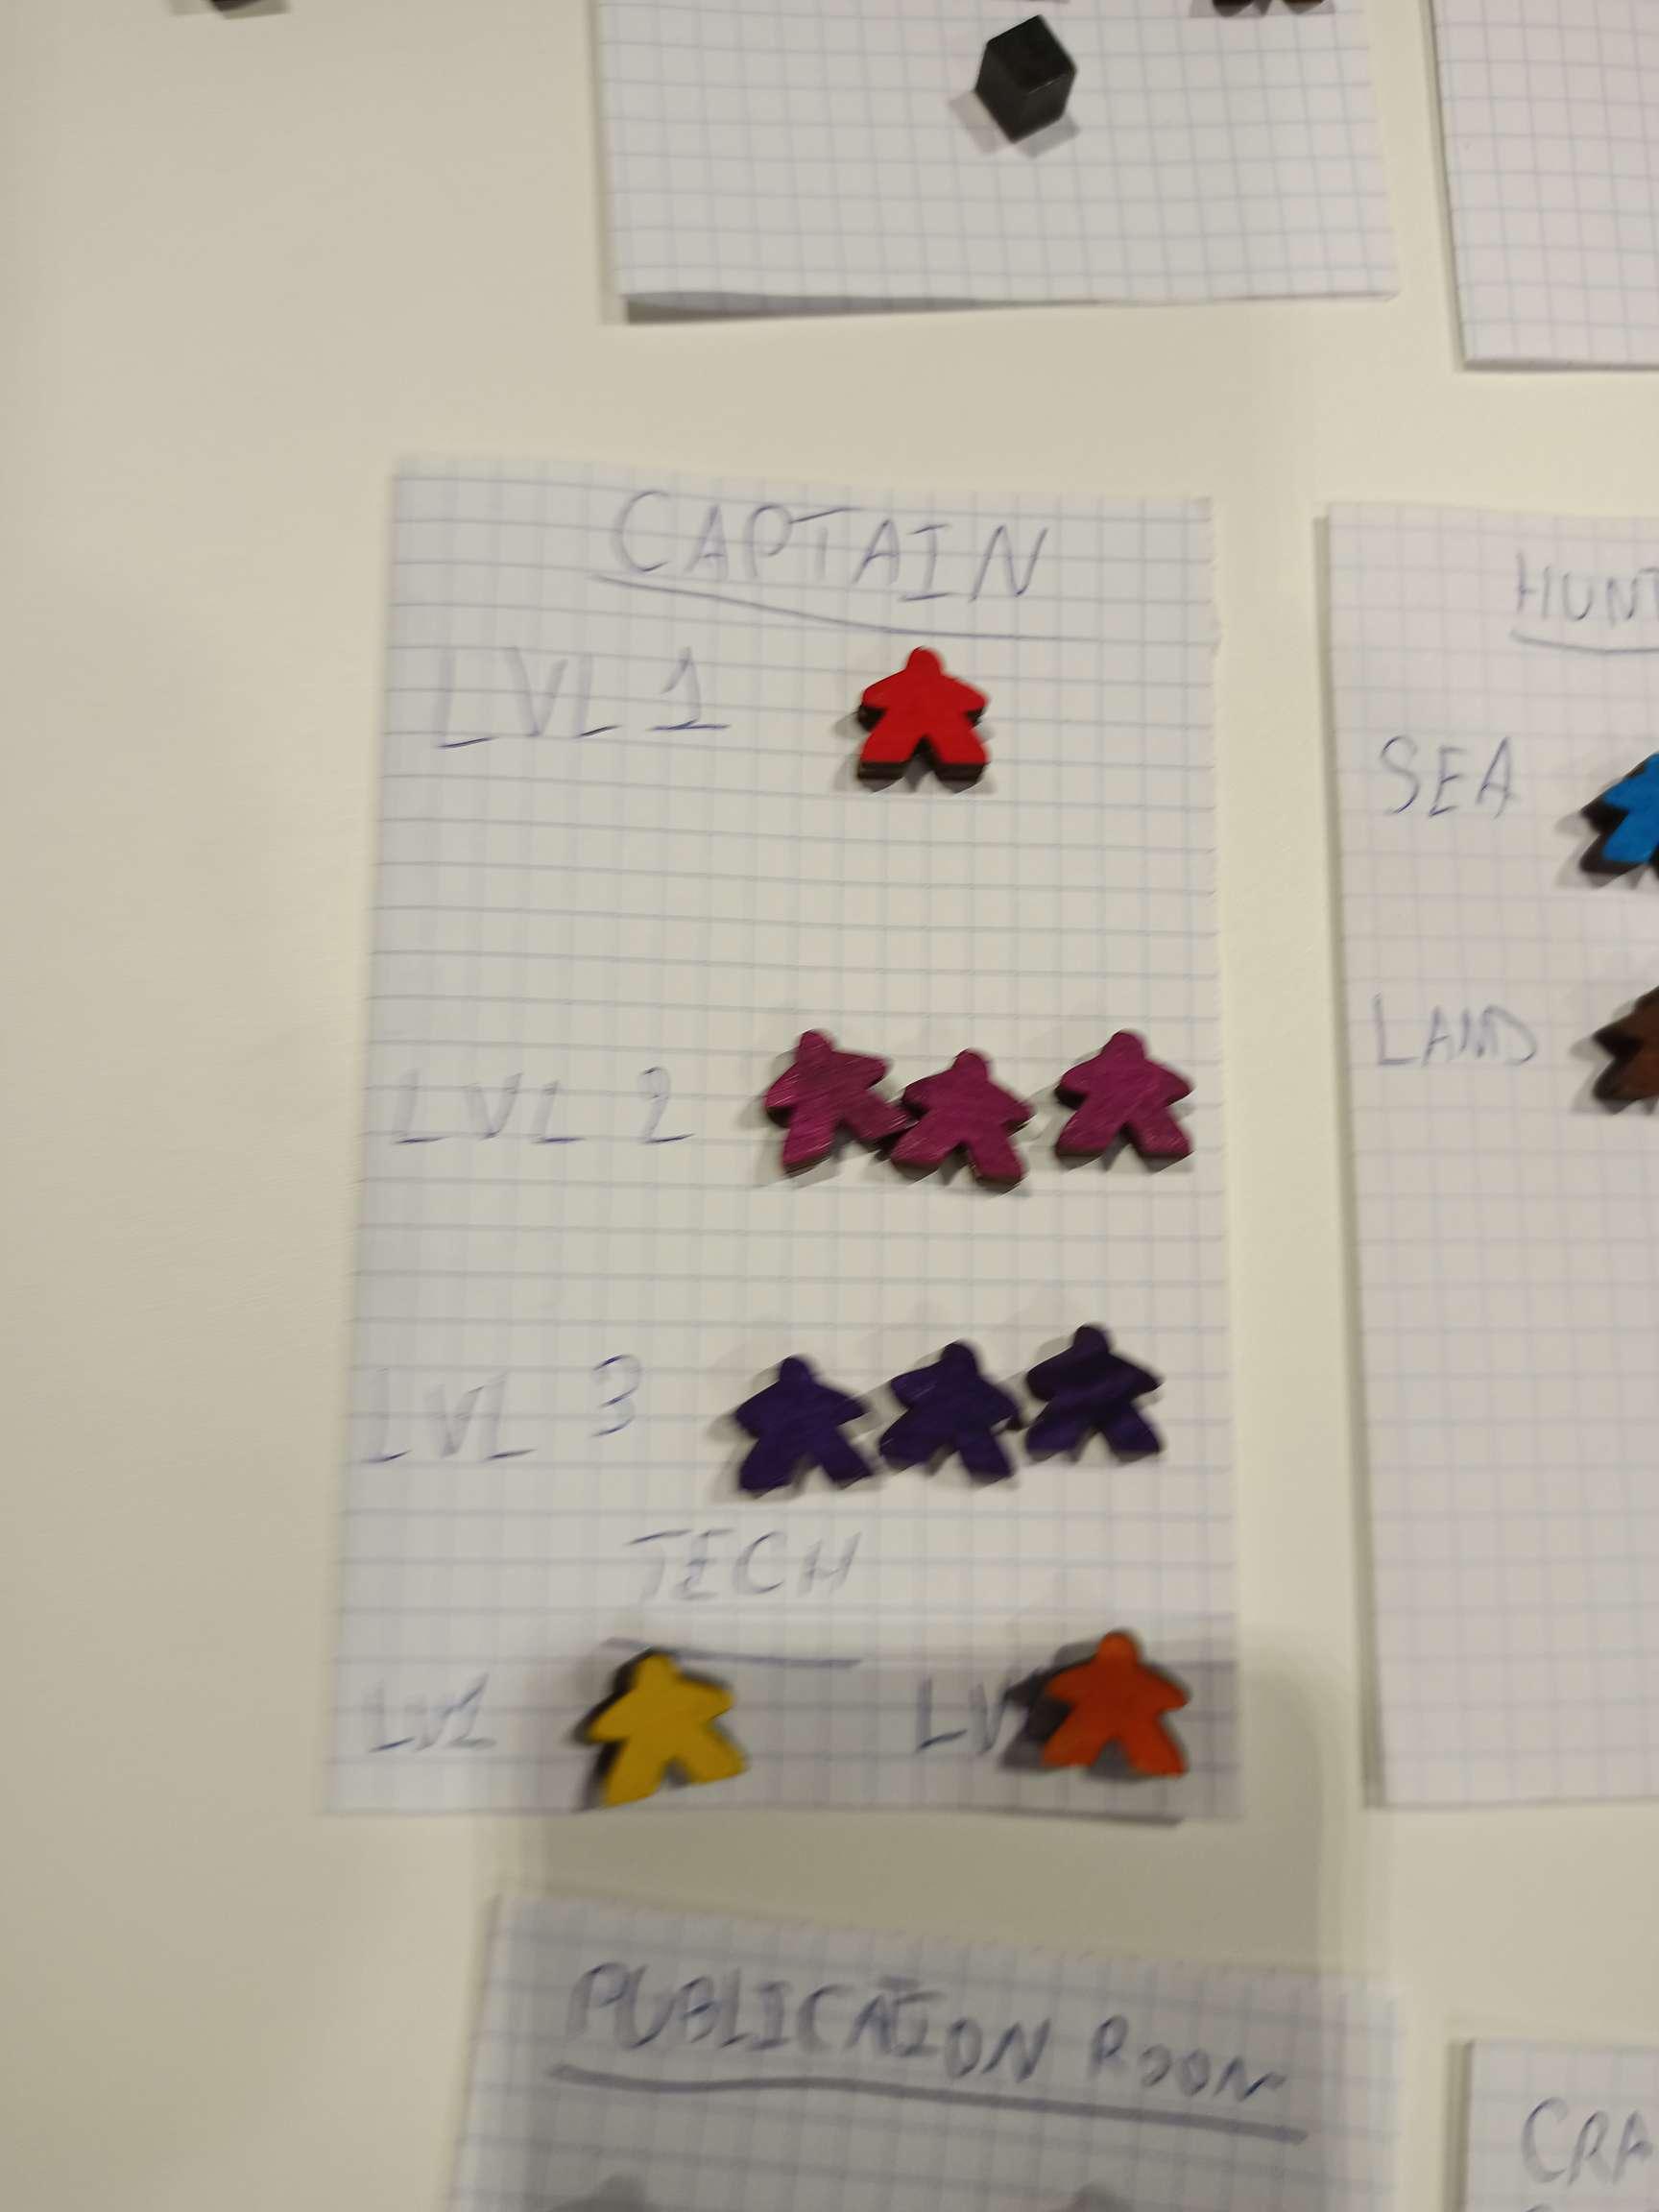 Meeples_Captains_Level_1_2_and_3.jpg